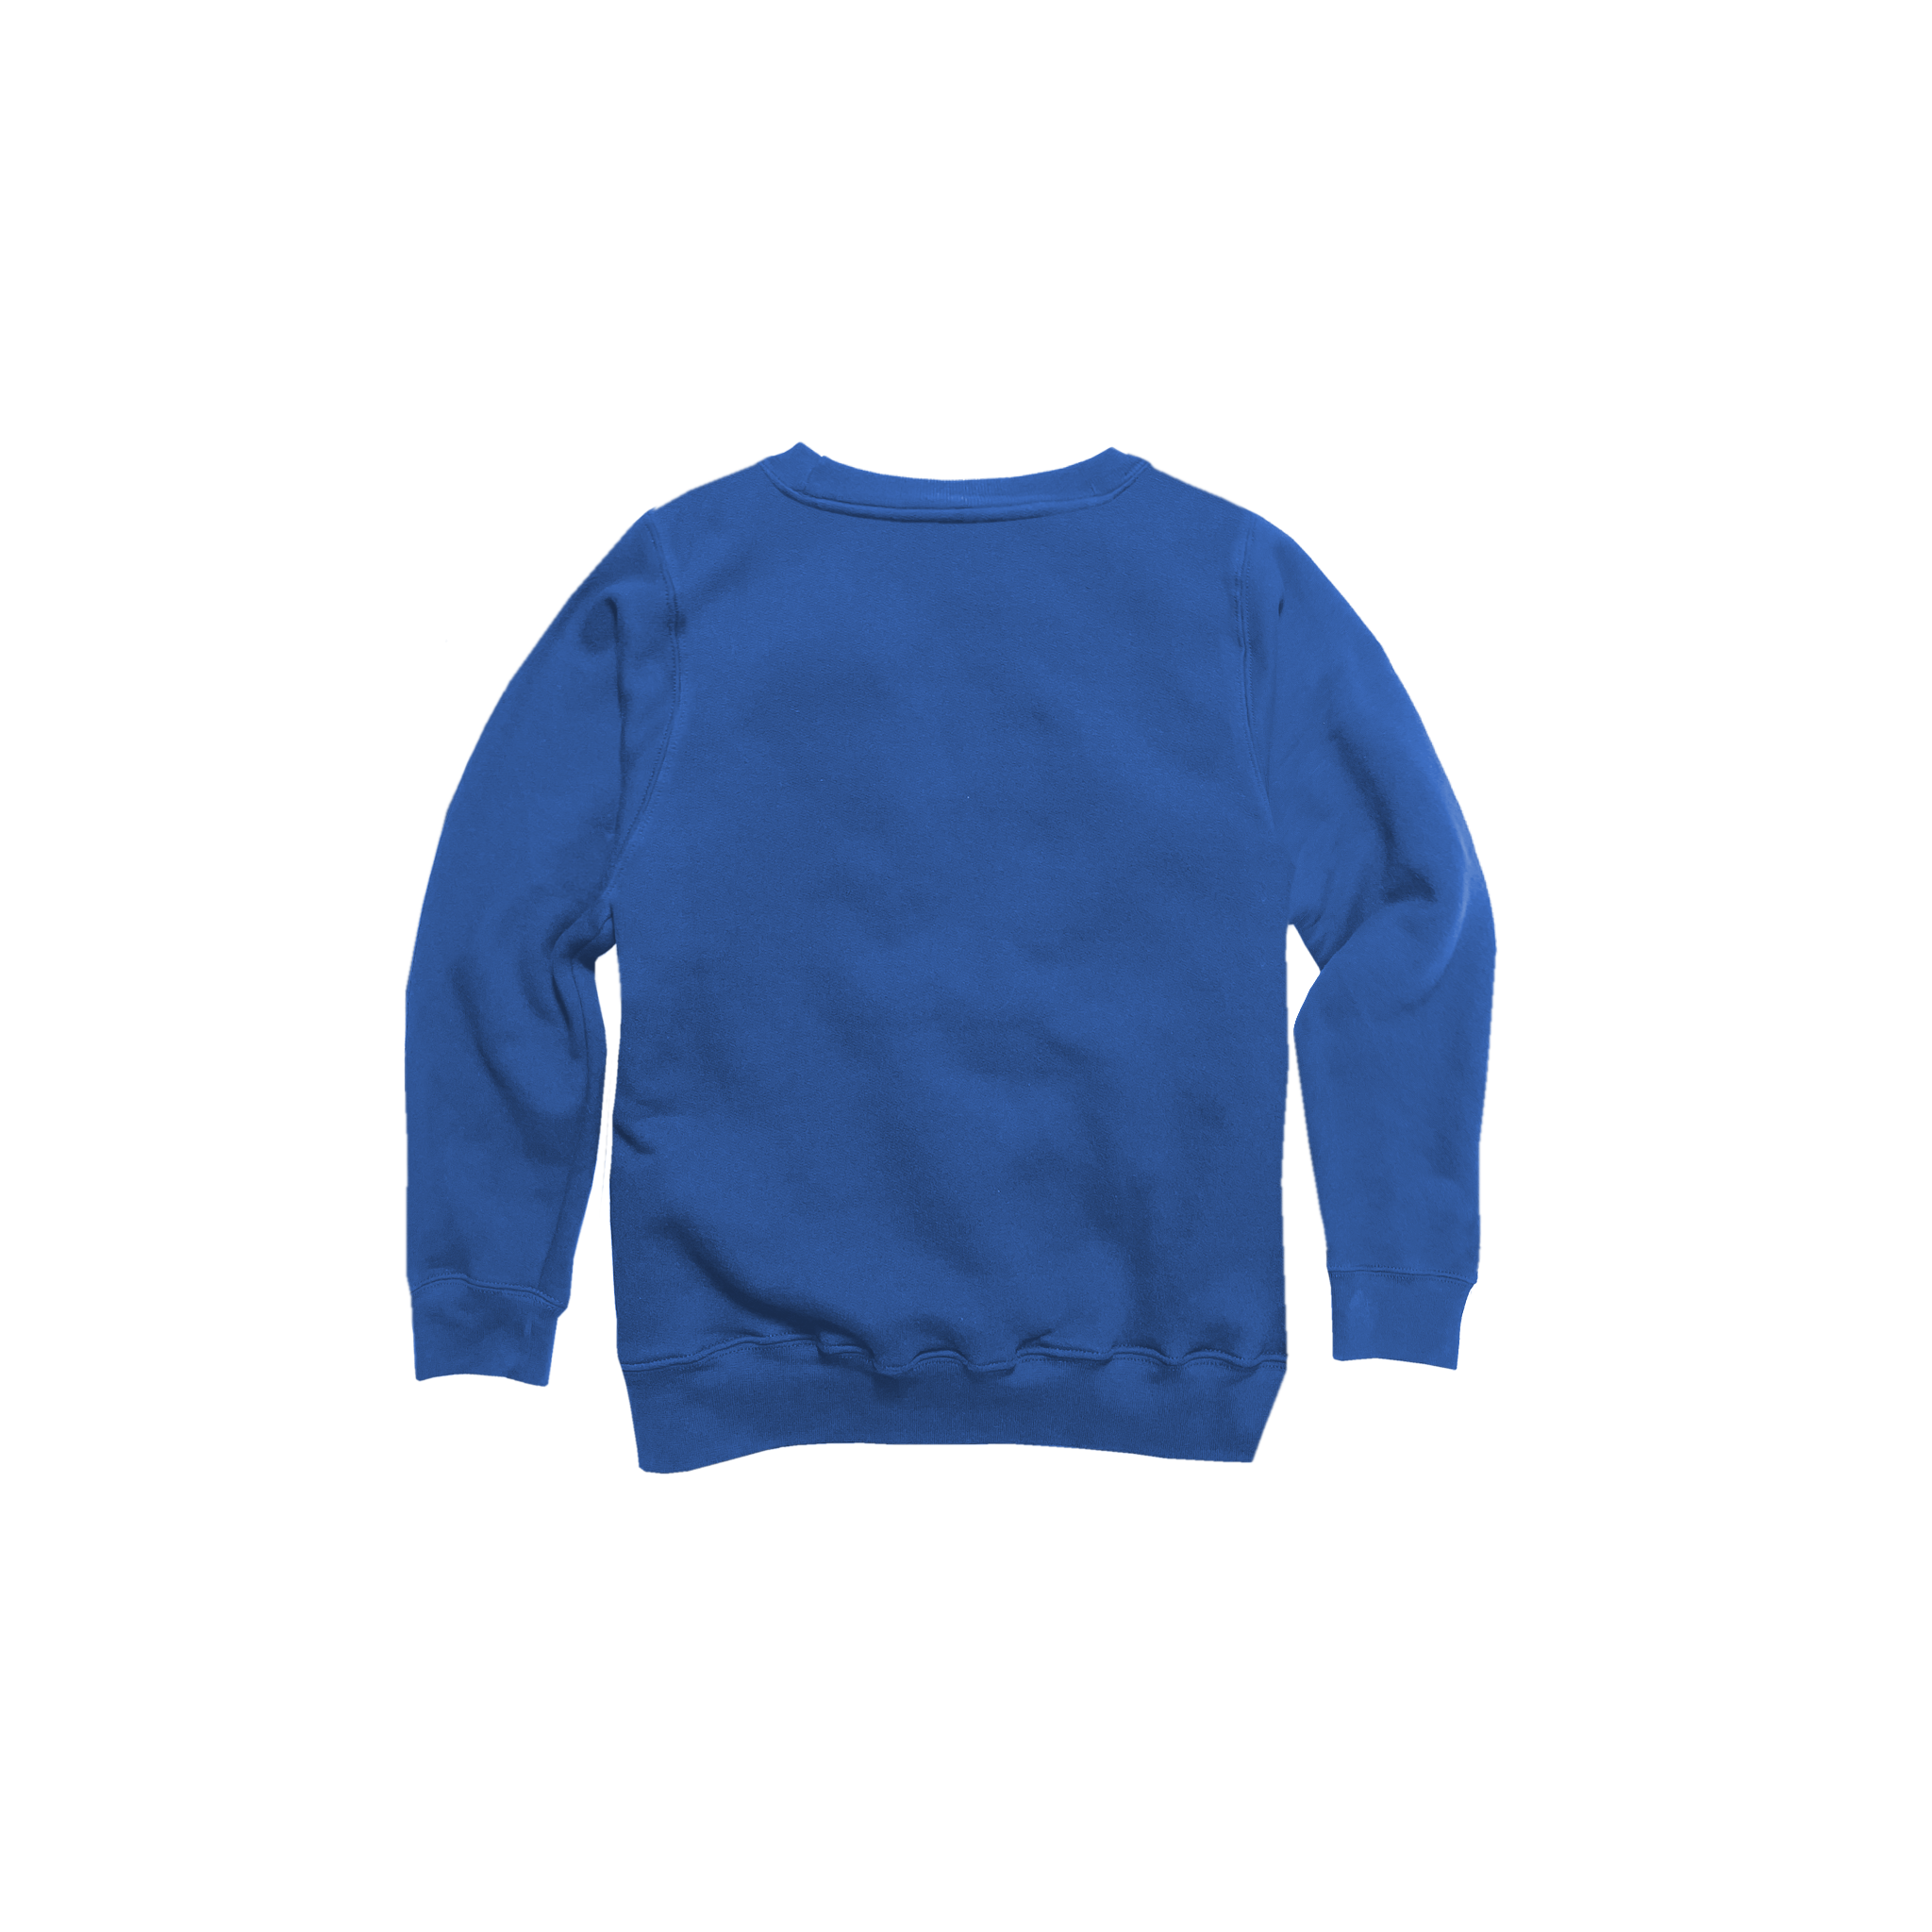 Back Flat Lay of GOEX Youth Fleece Crew in Royal